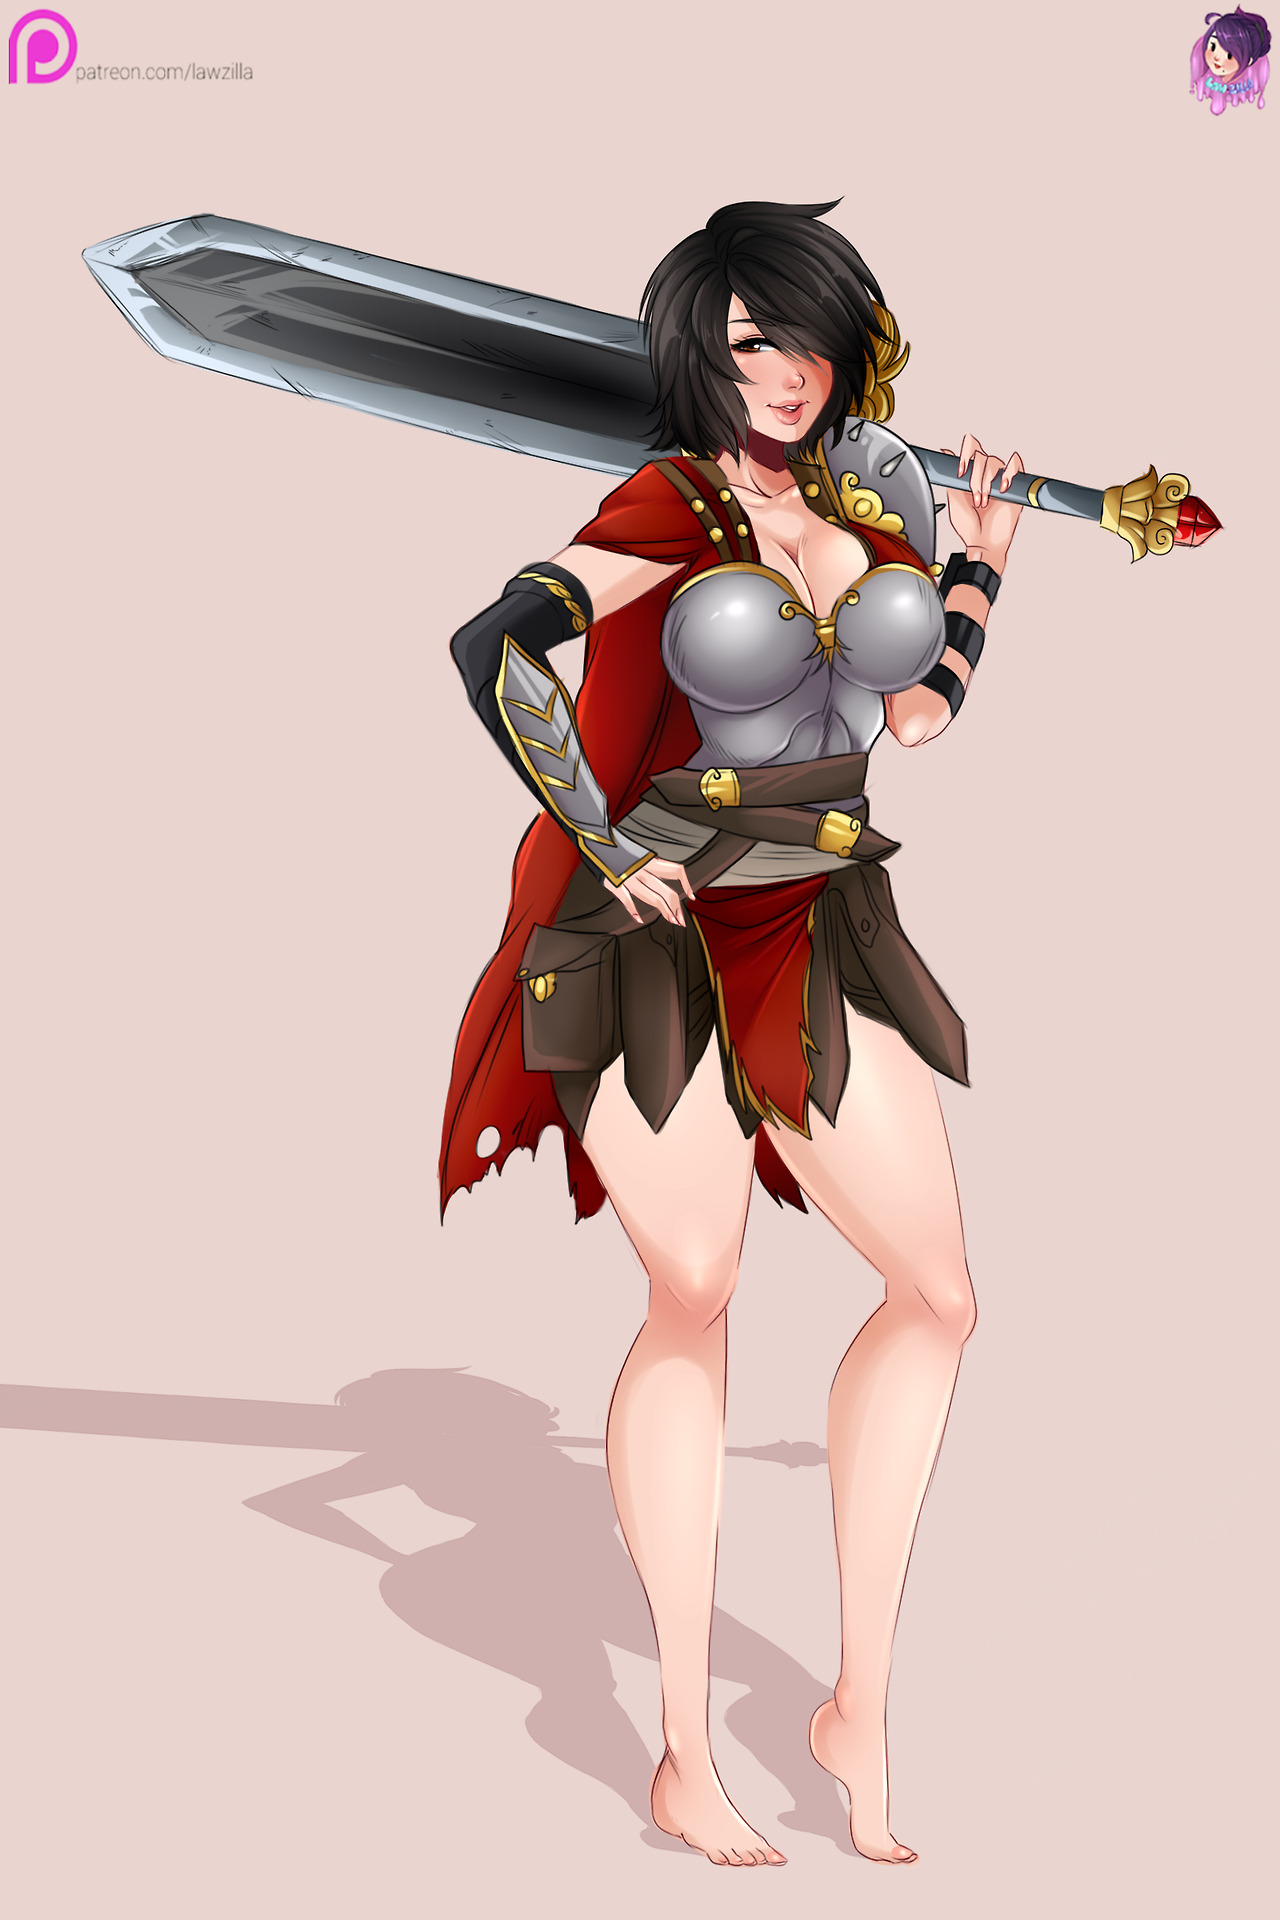 Bellona finished! &lt;3 :)All the versions (Traditional/Traditional v2/E-sports/Bikini/Nude/Lingerie/Riven